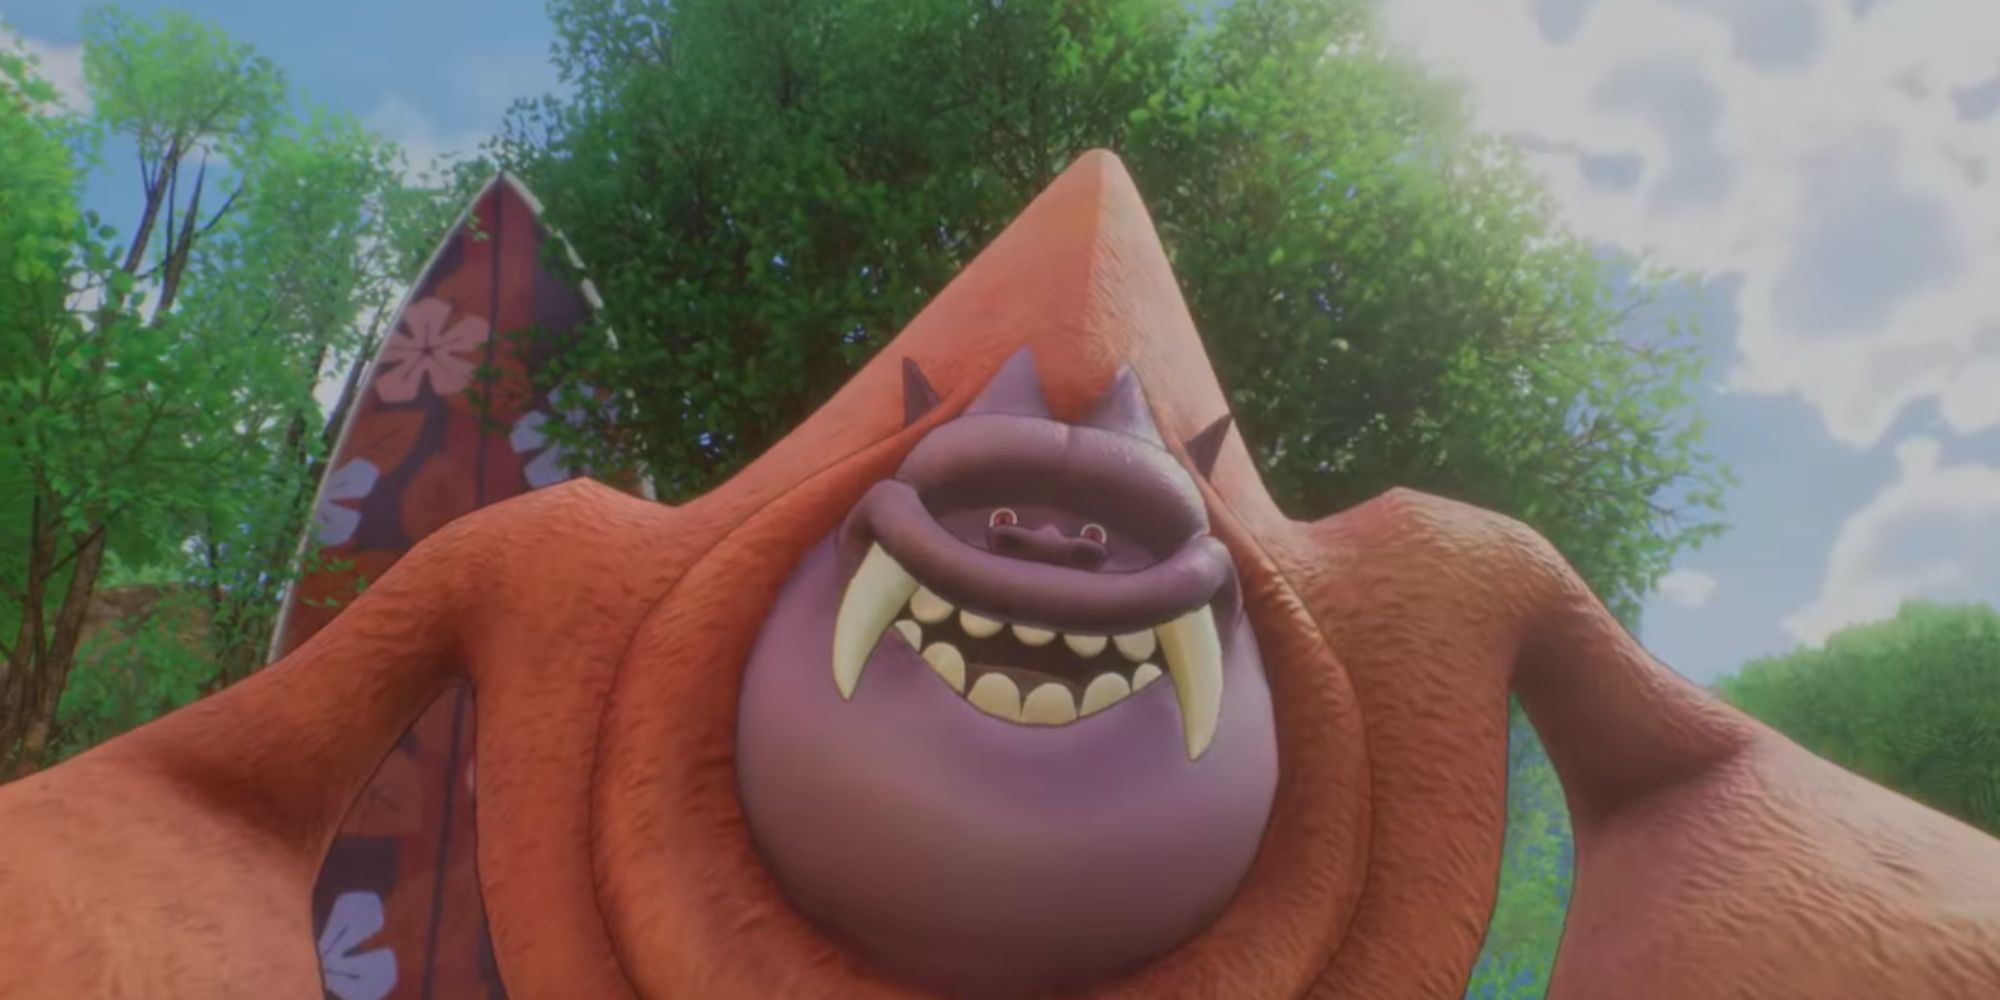 del kong boss from one piece odyssey